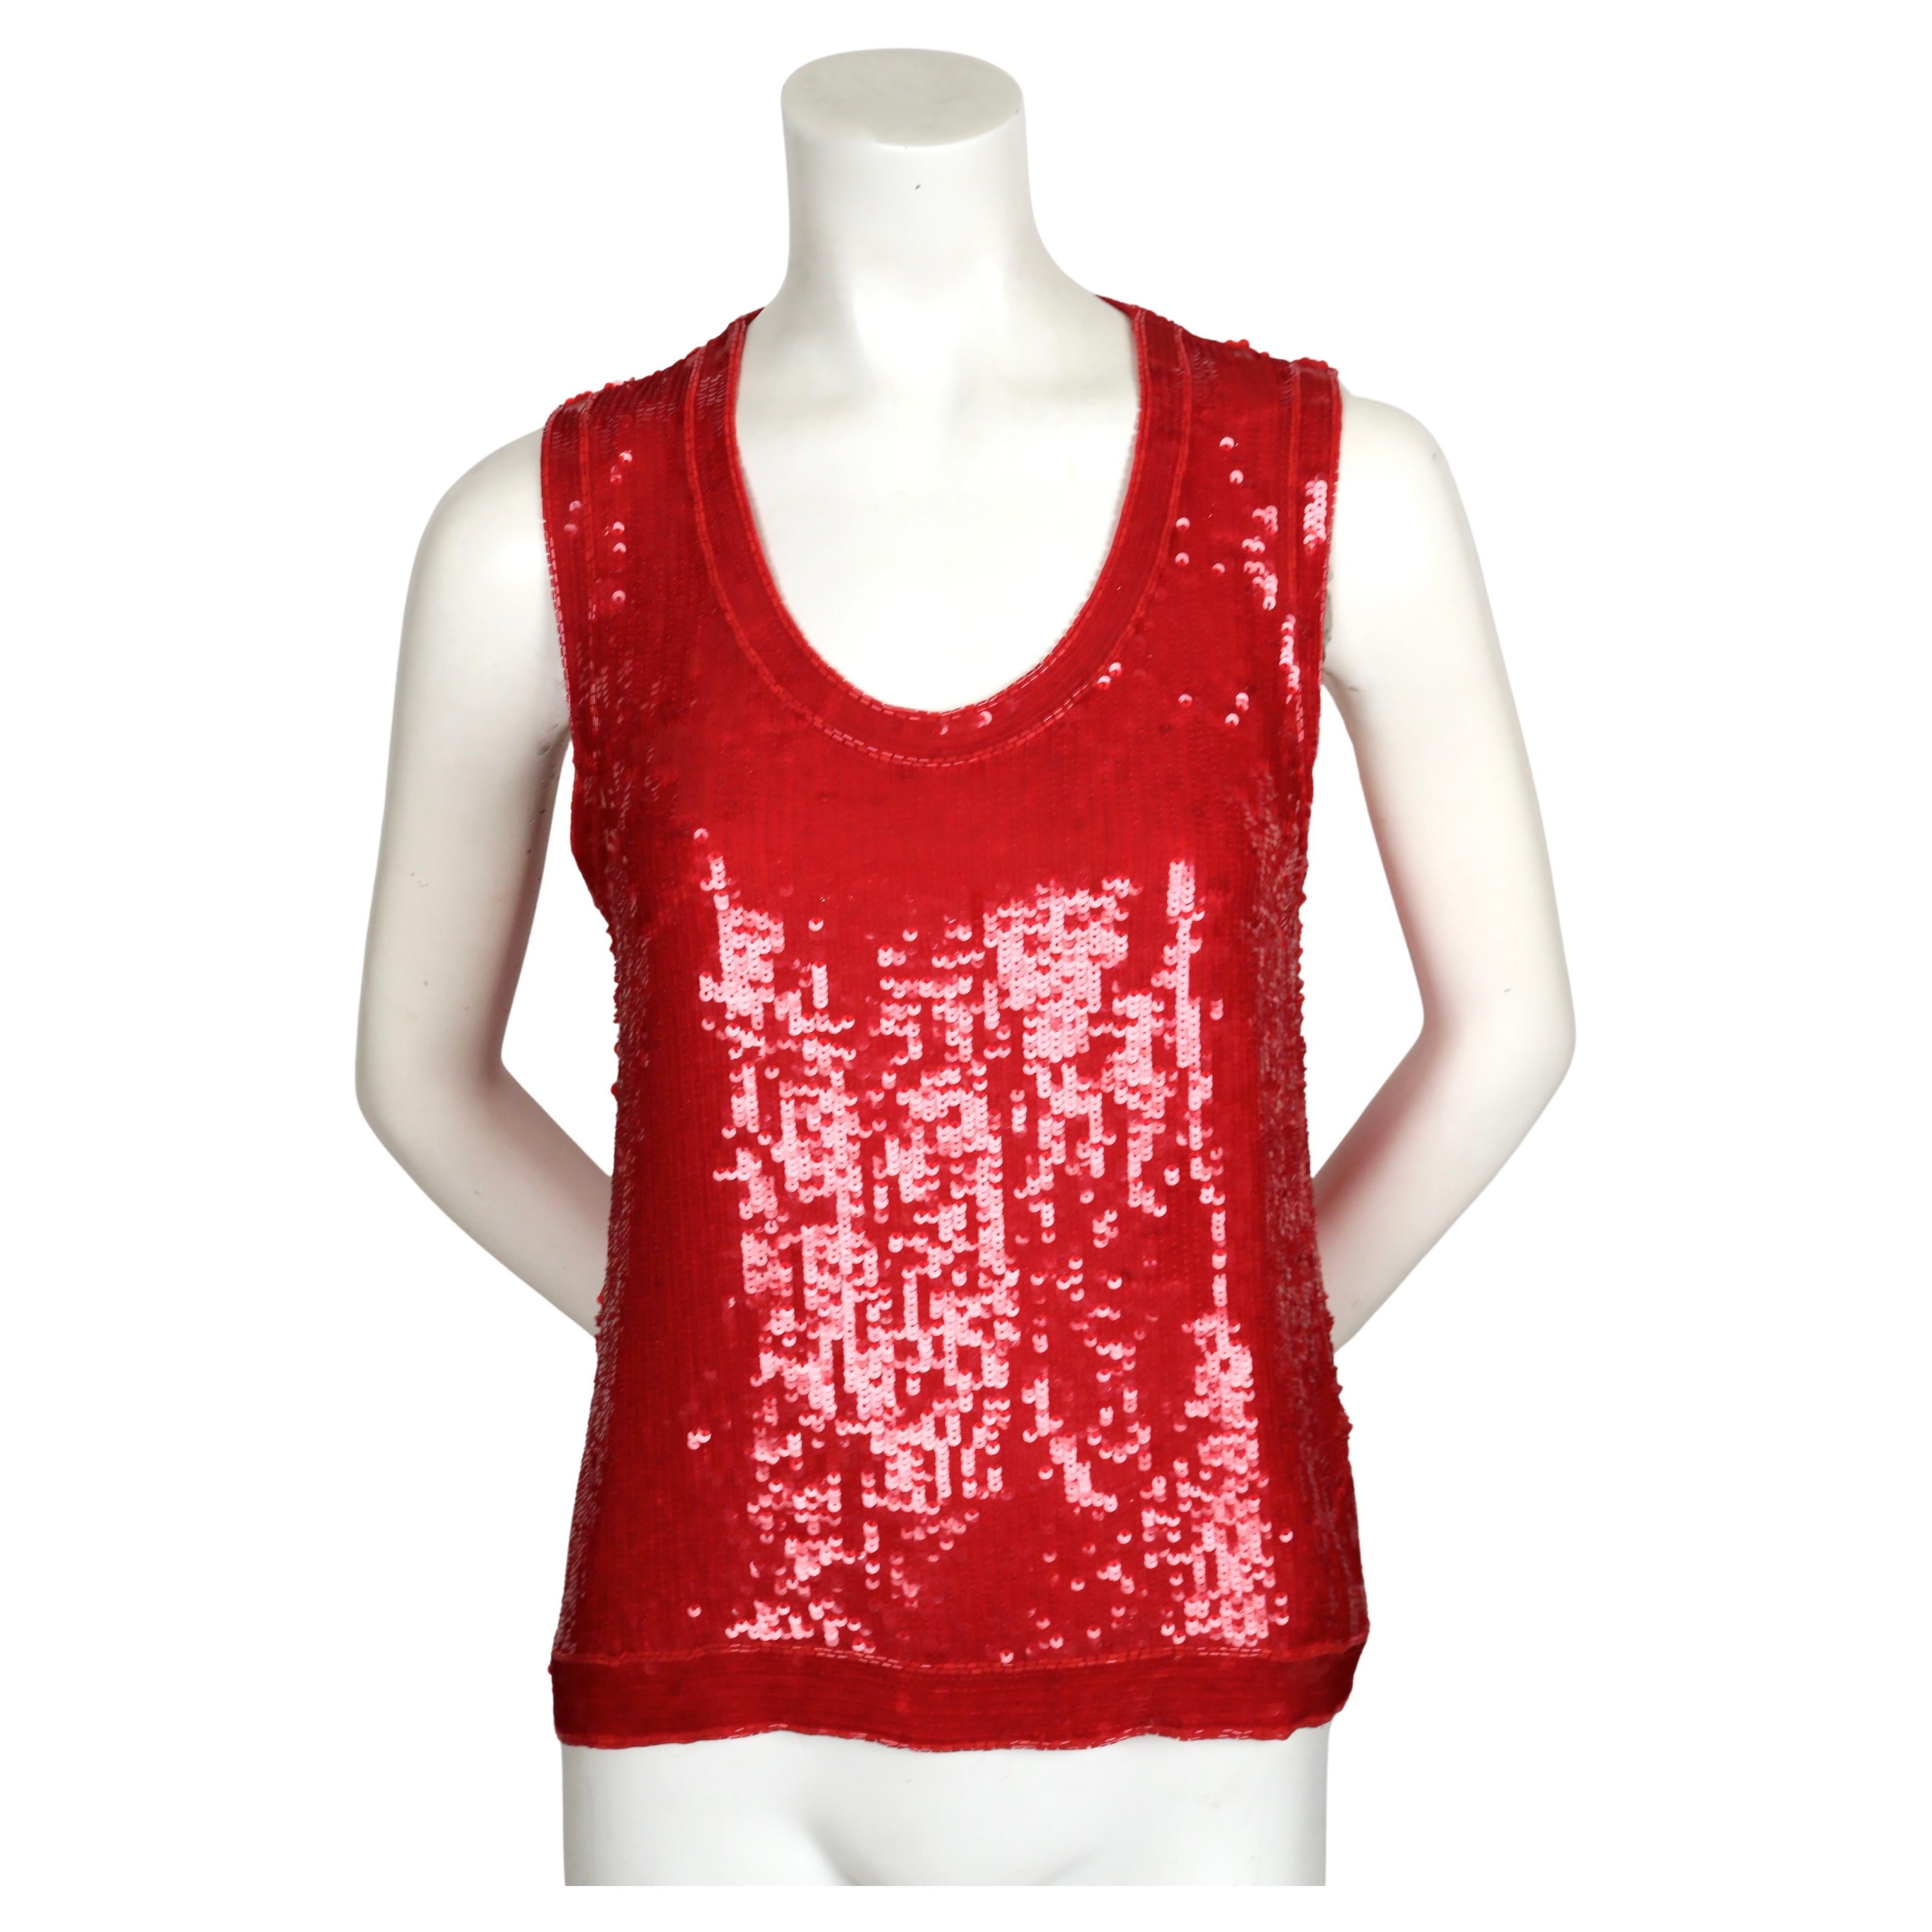 Vivid, red sequined tank top with bugle bead trim designed by Yves Saint Laurent dating to the late 1970's. Labeled a French size L however this best fits a modern S or M. Approximate measurements: shoulder 14